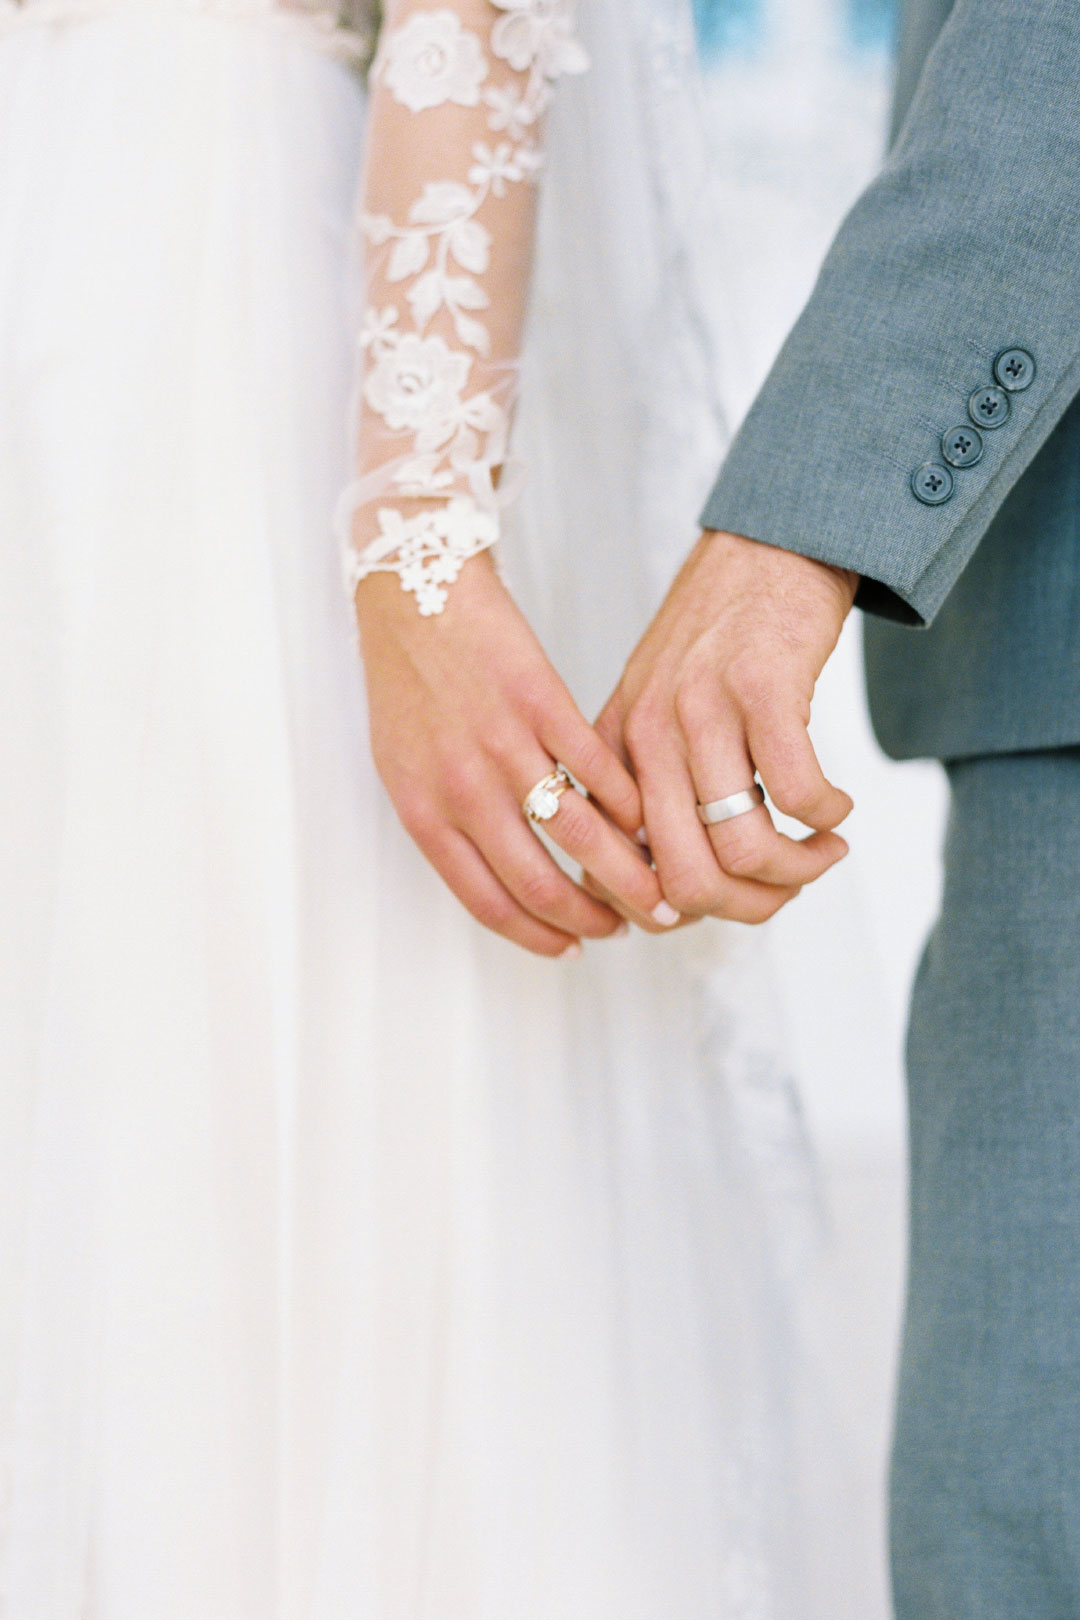 Hands holding wedding rings 